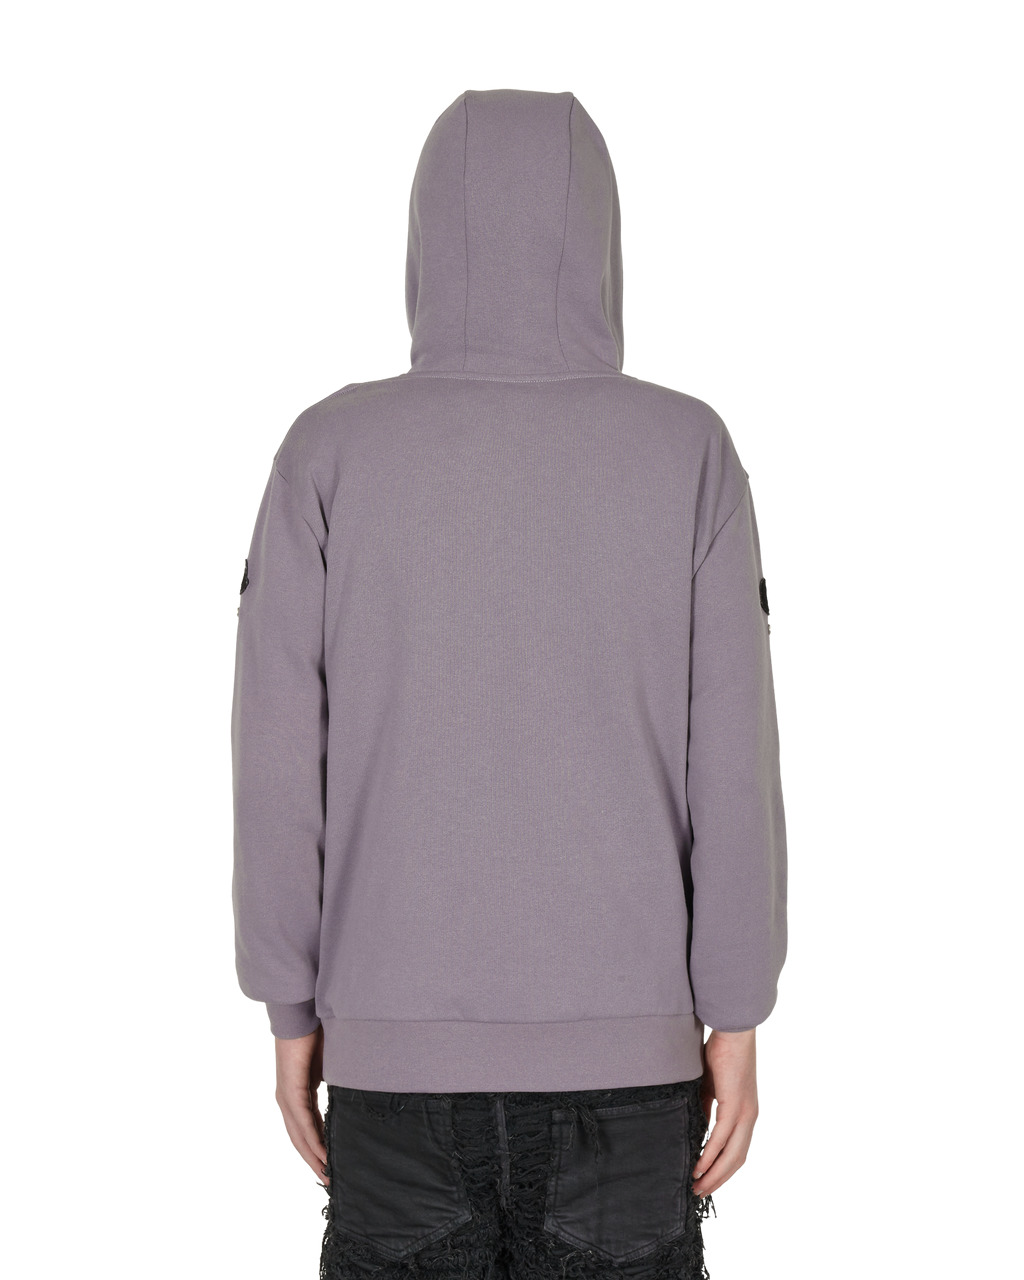 6 MONCLER 1017 ALYX 9SM HOODIE SWEATER - 5